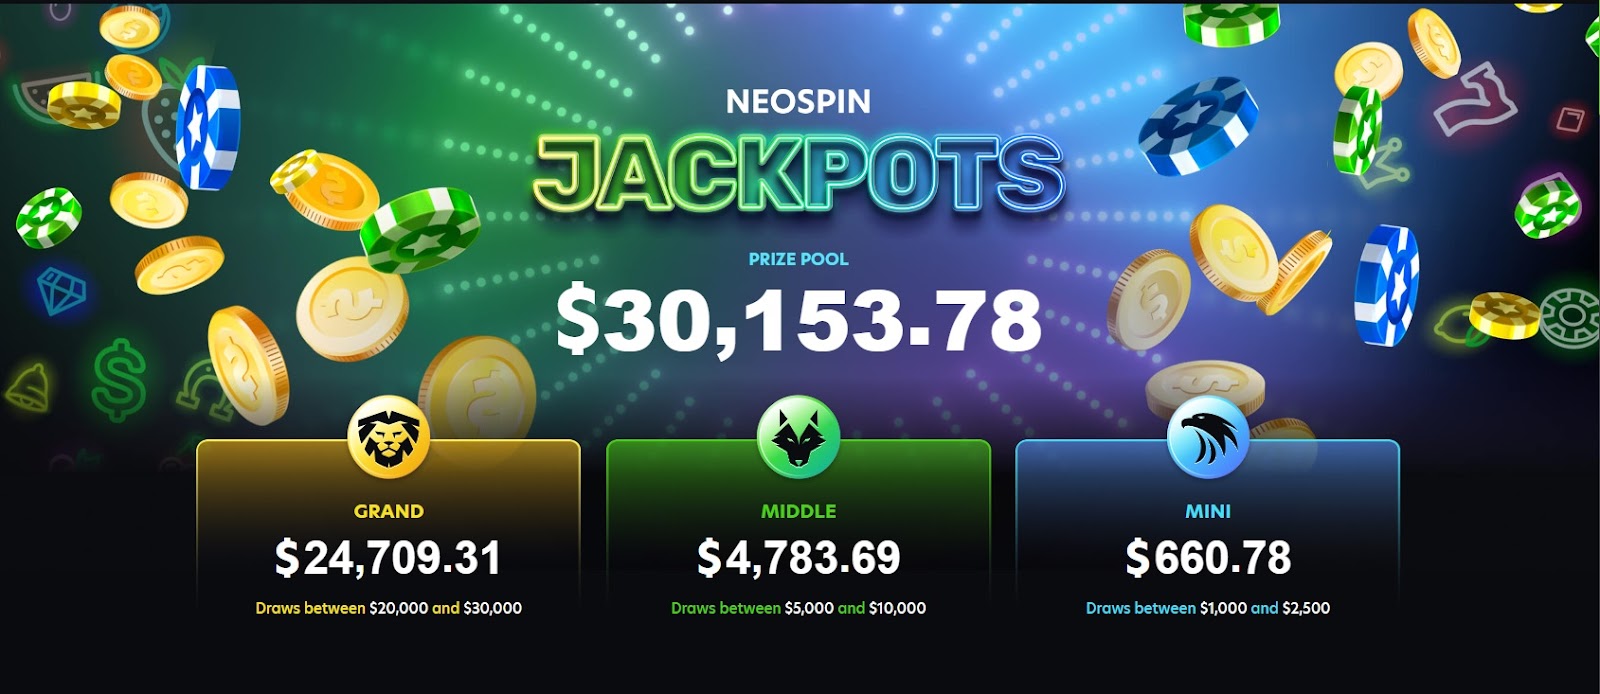 NeoSpin Casino: Login, Register and Get a Bonus of up to 100 Free Spins + $10,000 6